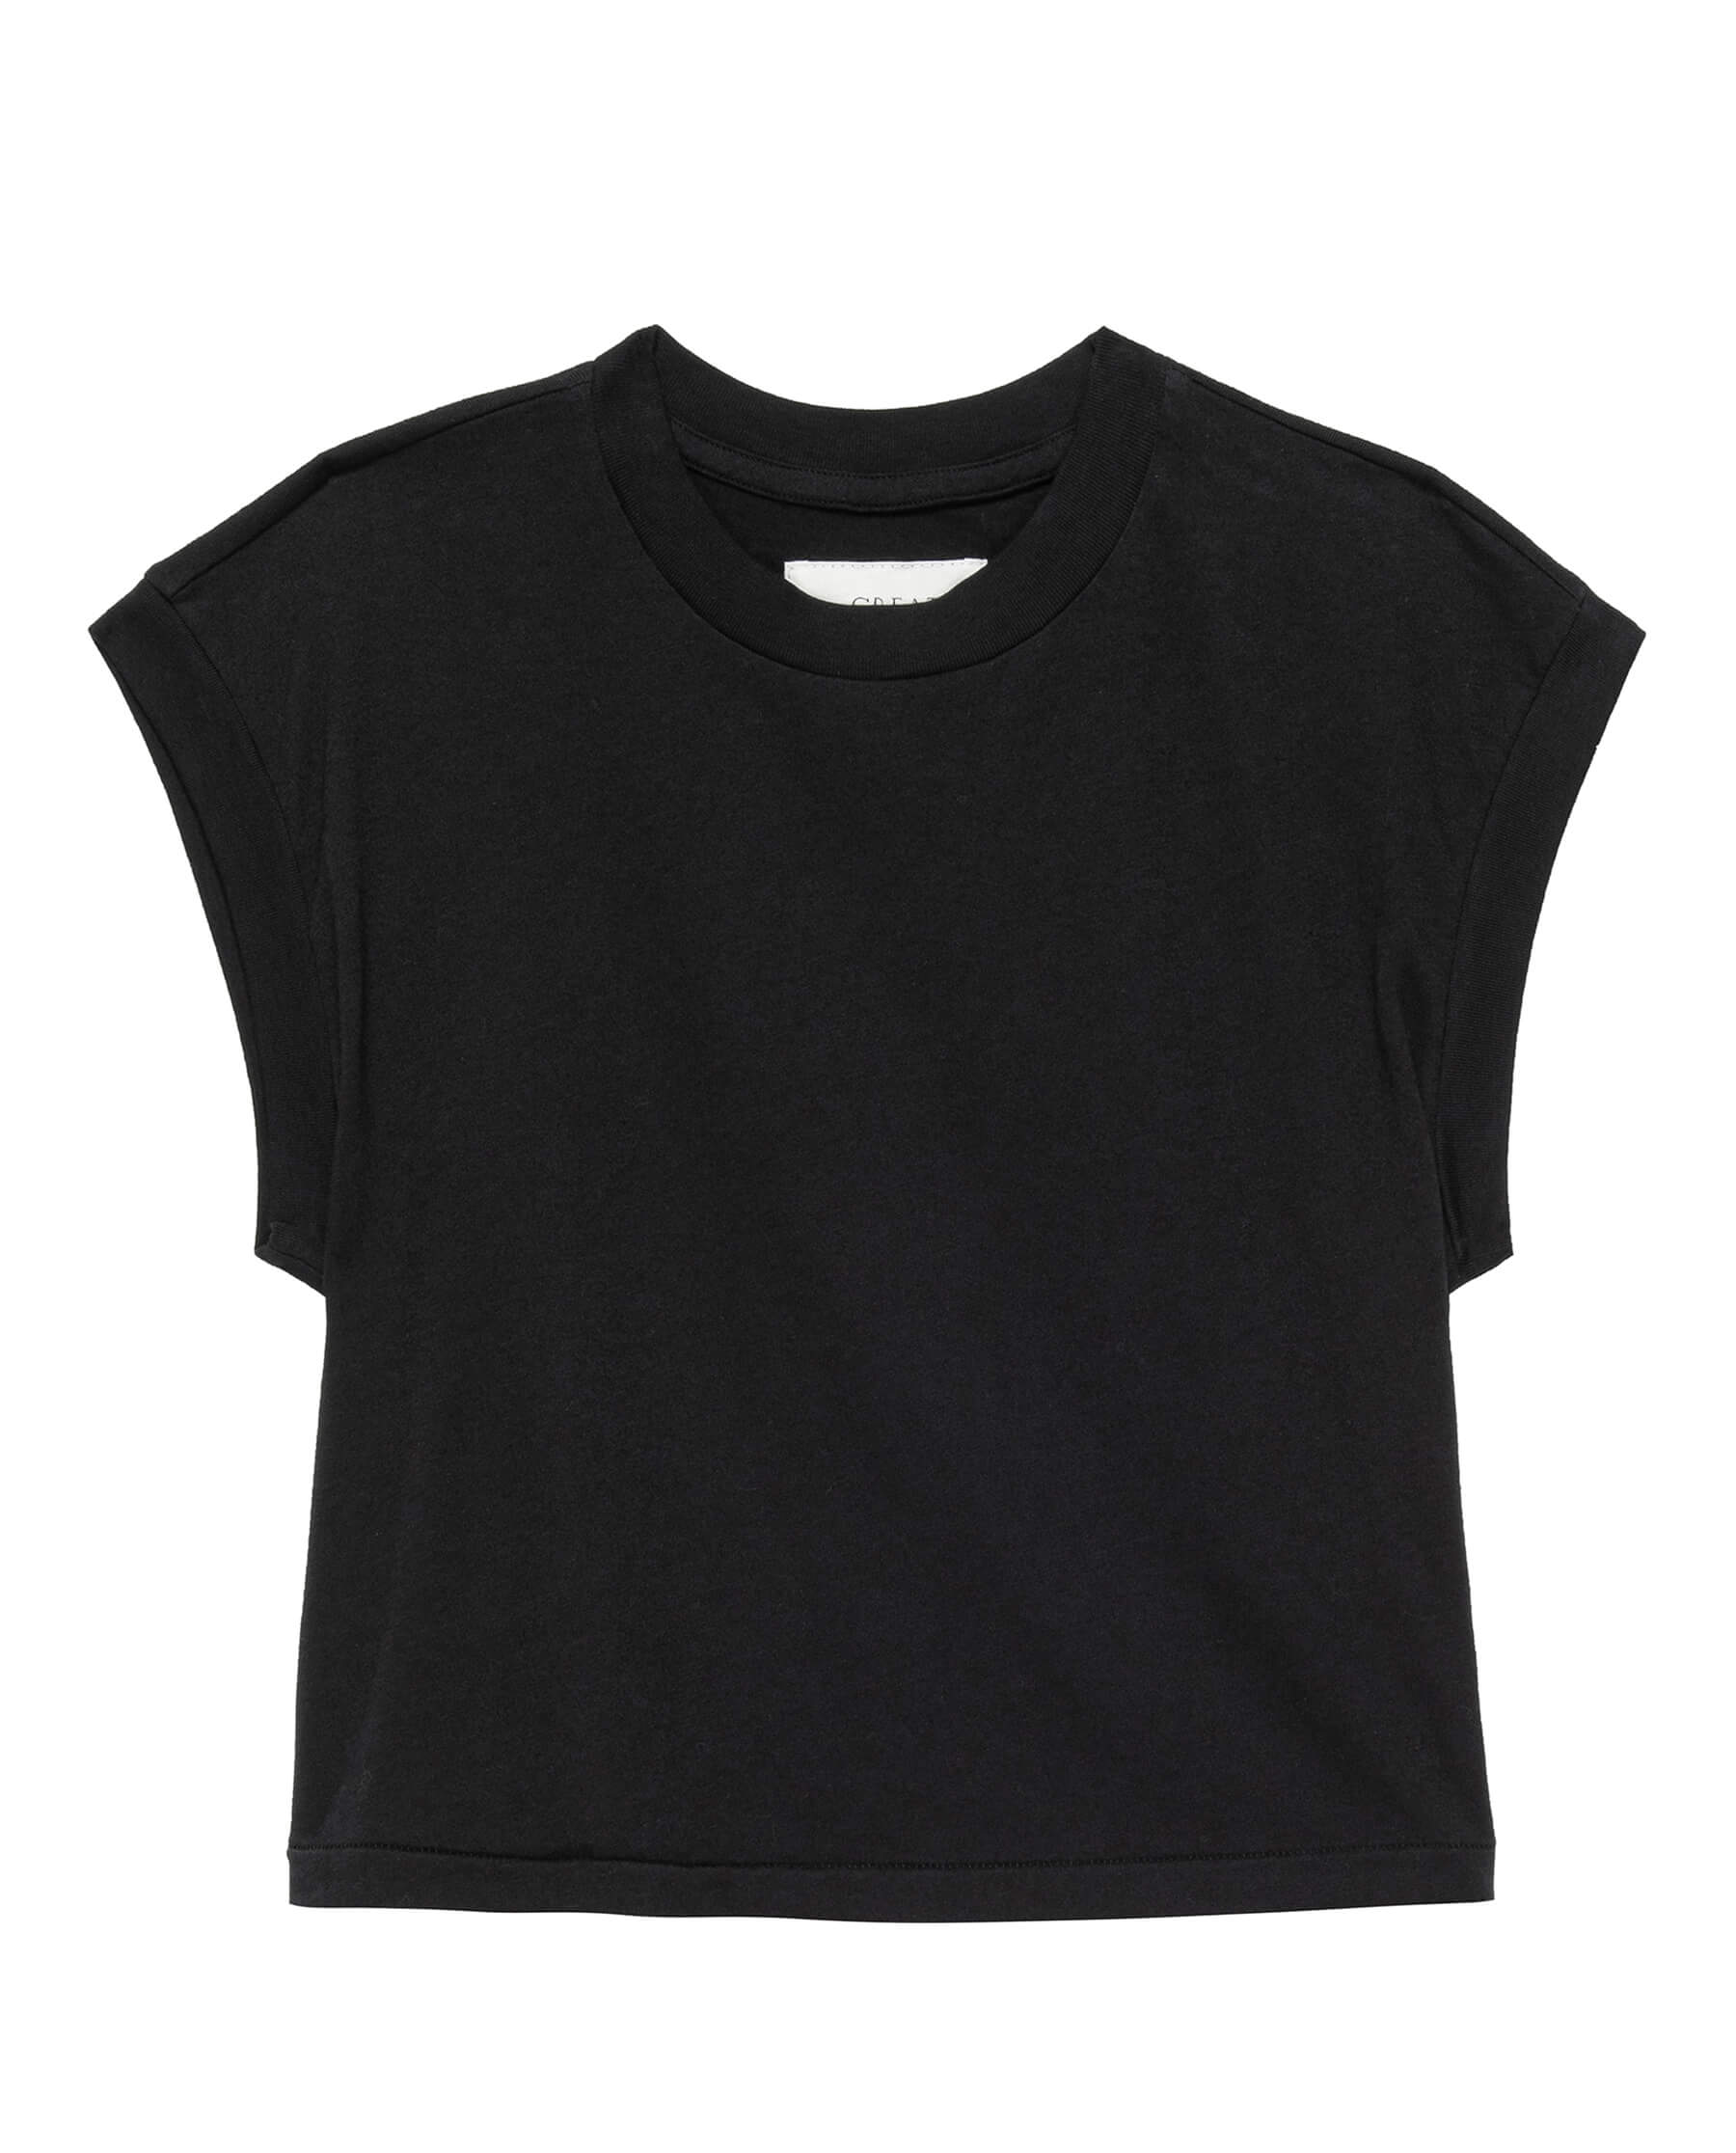 The Square Tee. -- Almost Black